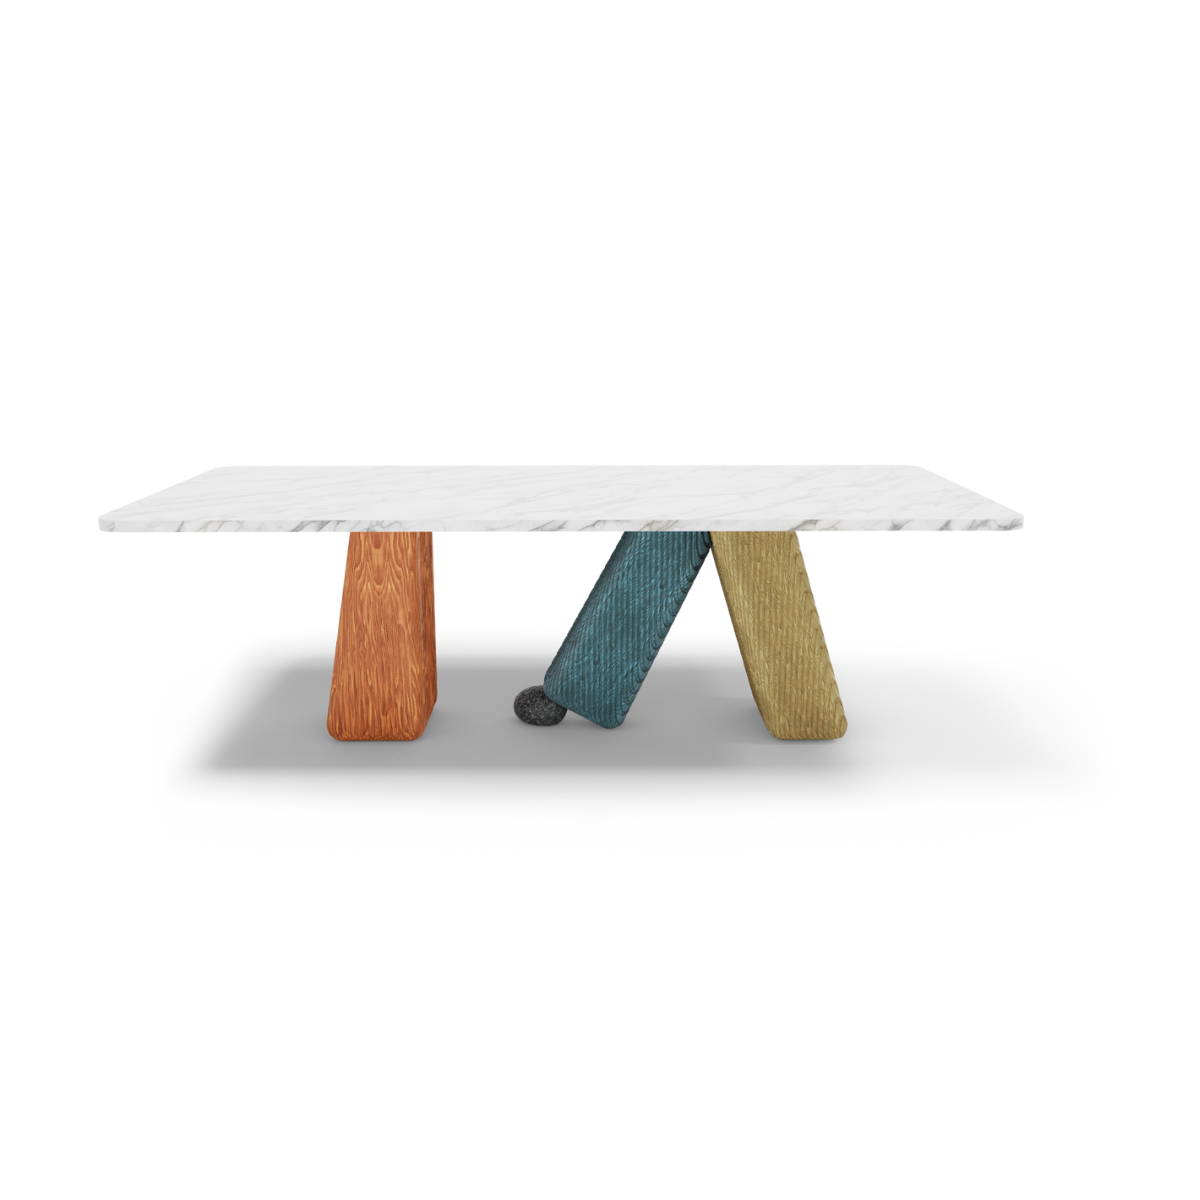 heel-stone-dining-table-covet-collection-ptang-studio